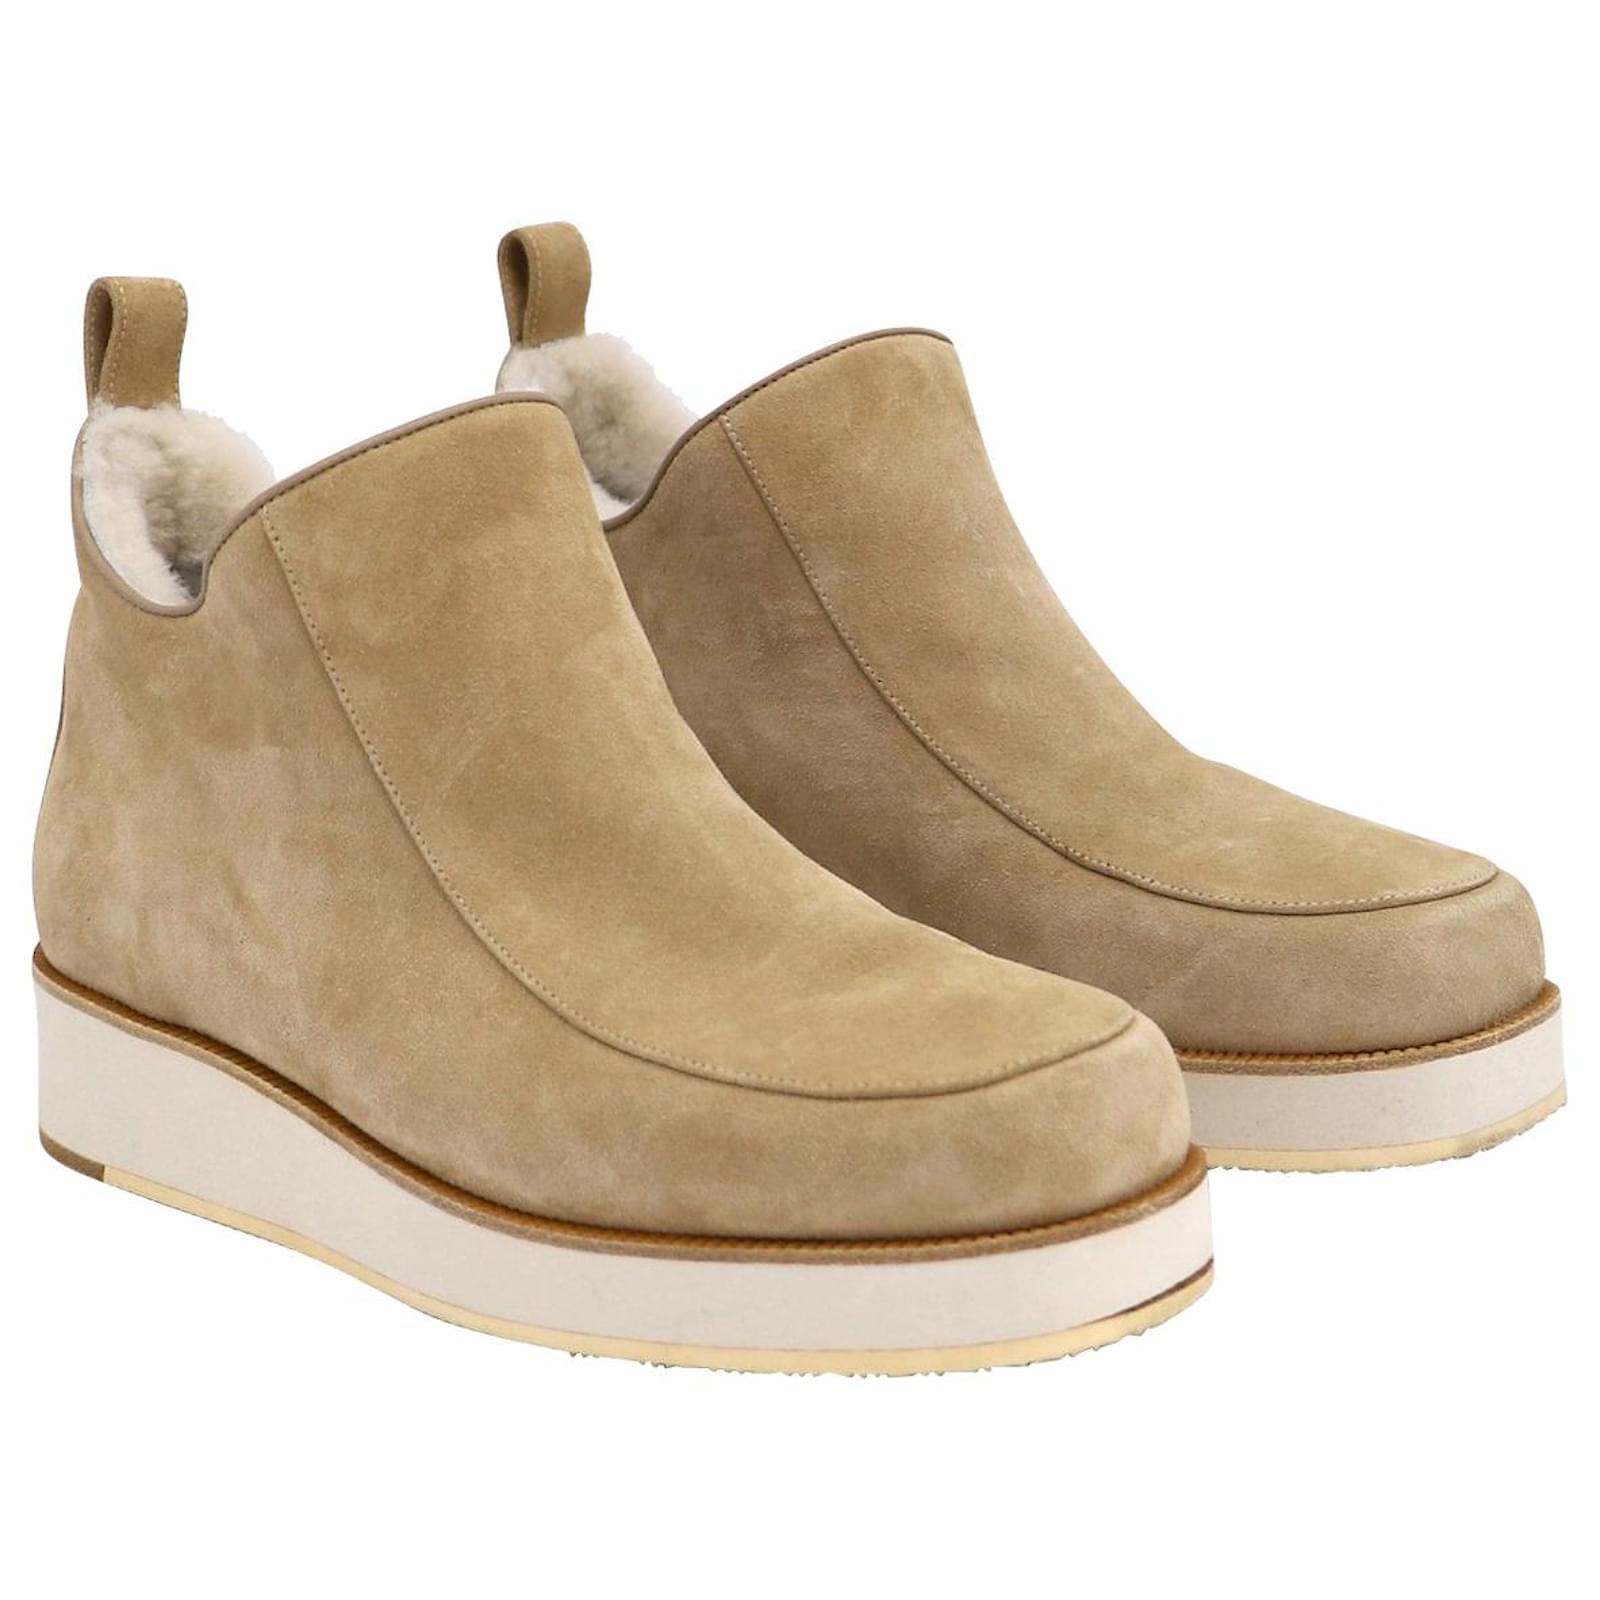 Harry shearling-lined suede ankle boots